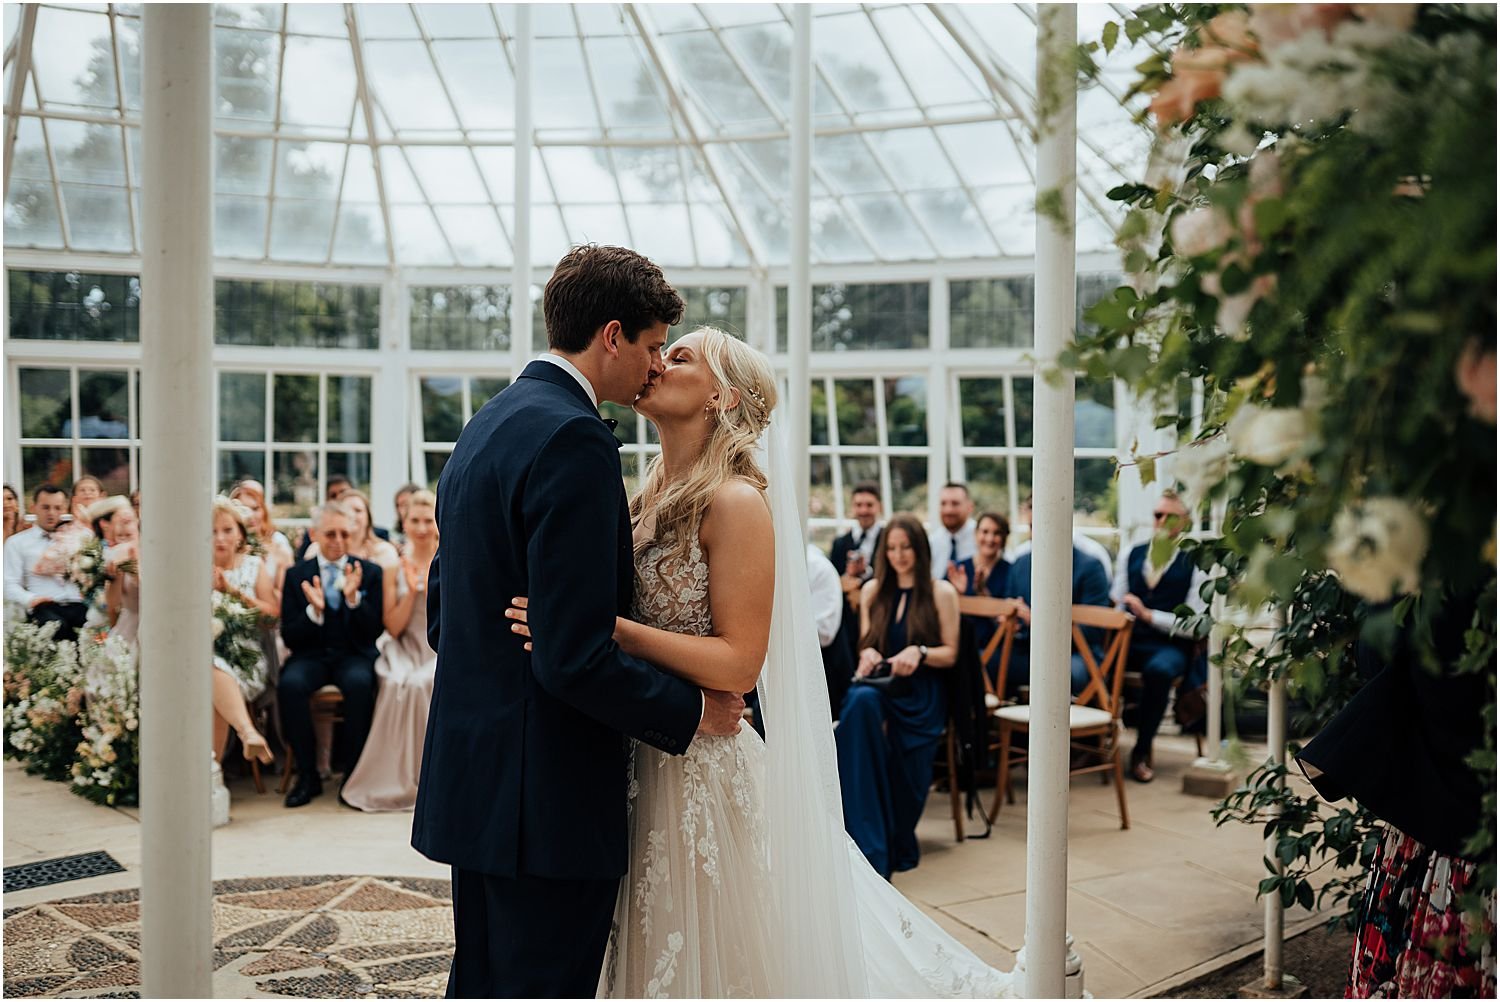 Wedding ceremony at Chiswick House conservatory